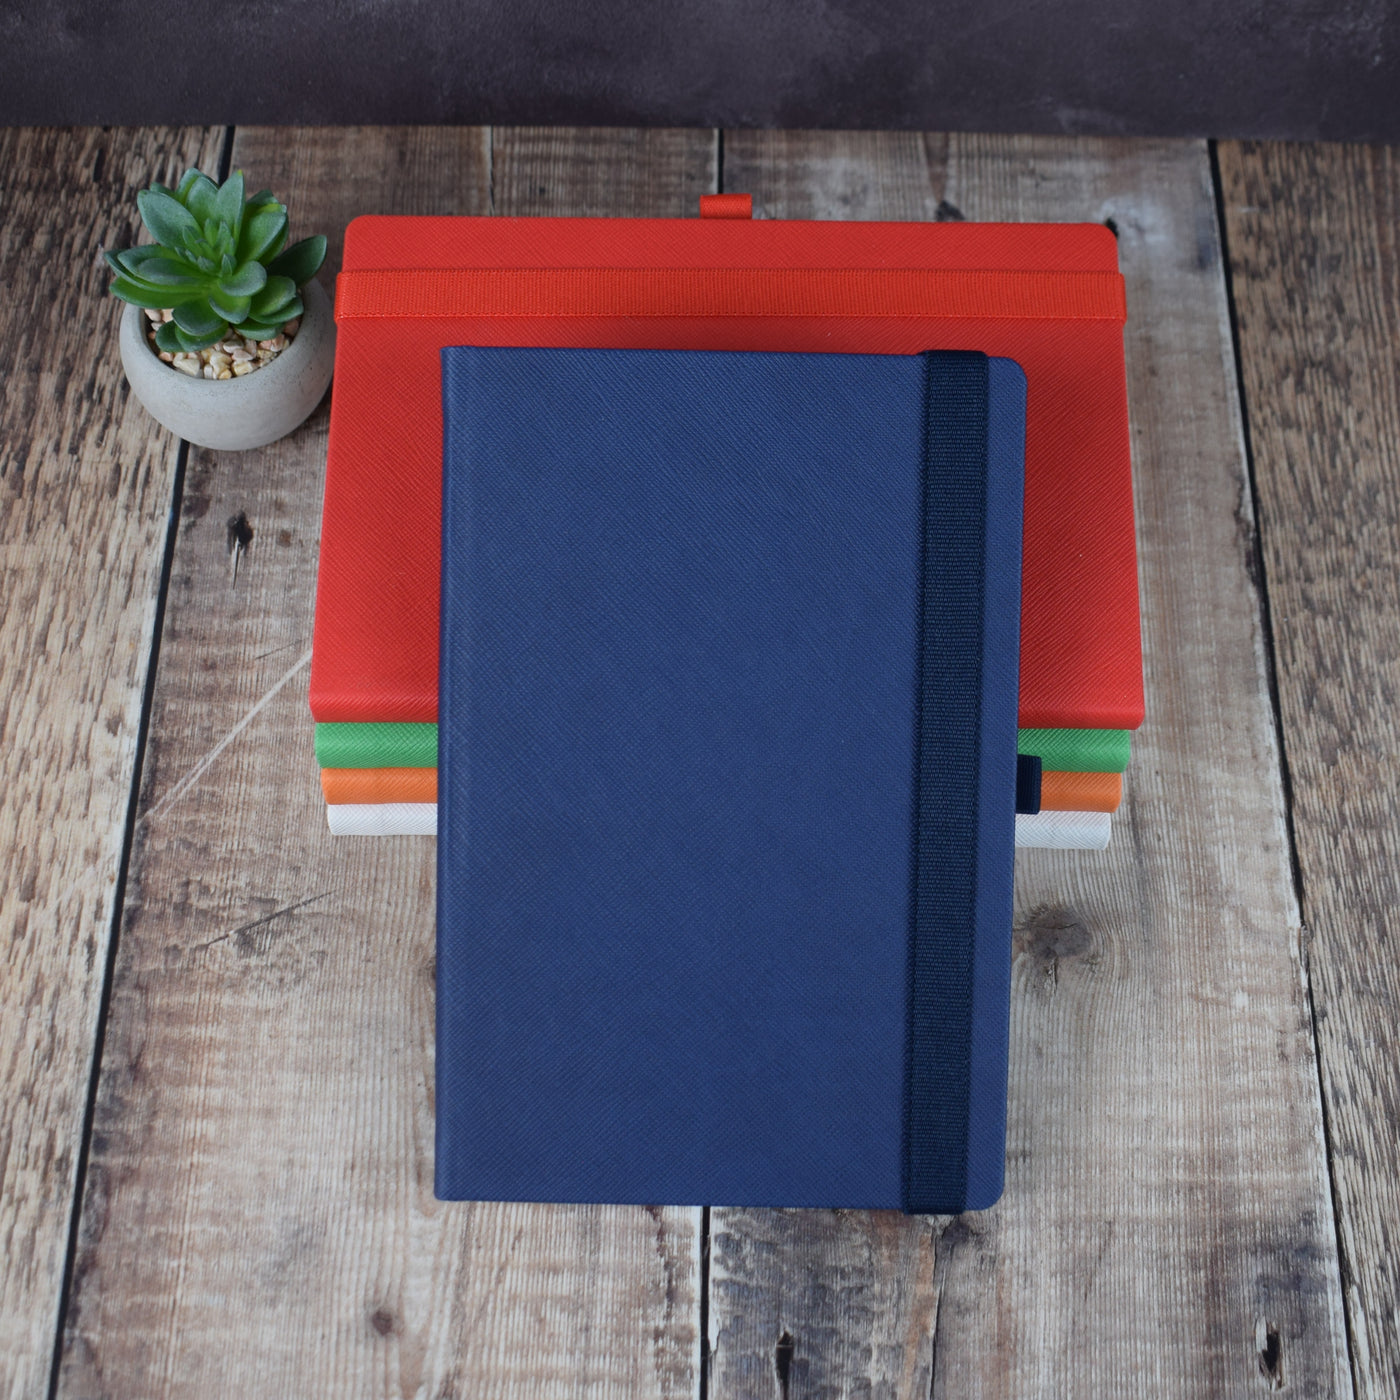 Printed Navy Blue Denim Feel Notebook With Logo - Corporate Gift, A5 Journal